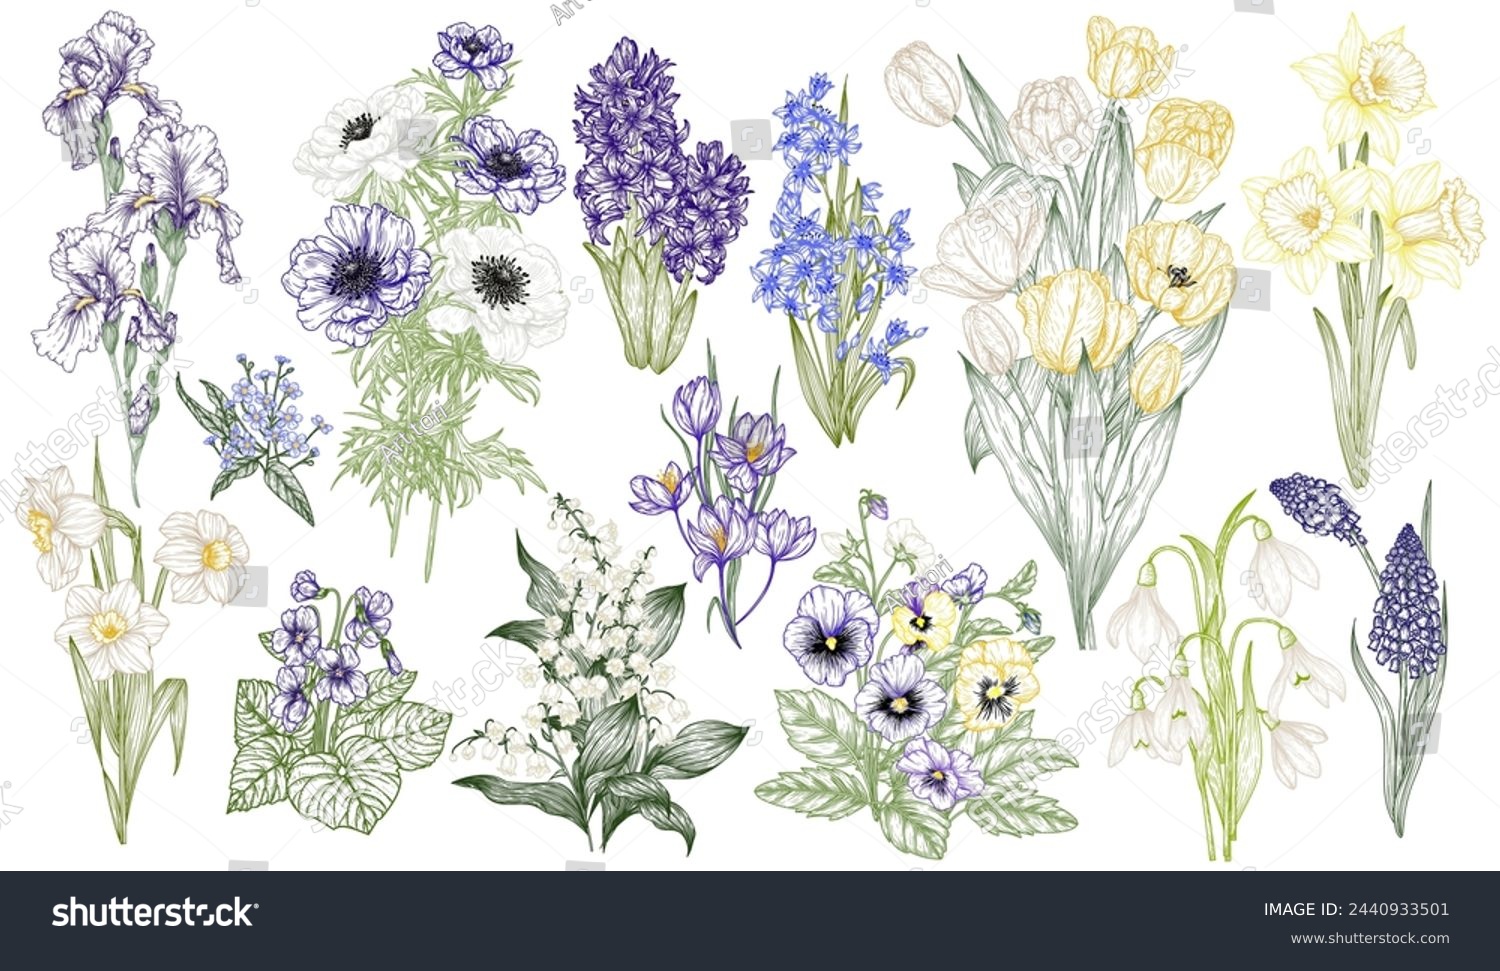 SVG of Vector set of 14 bouquets of spring flowers. Snowdrops, crocuses, brunnera, tulips, muscari, hyacinths, irises, daffodil, pansies, lily of the valley, anemone, scilla svg